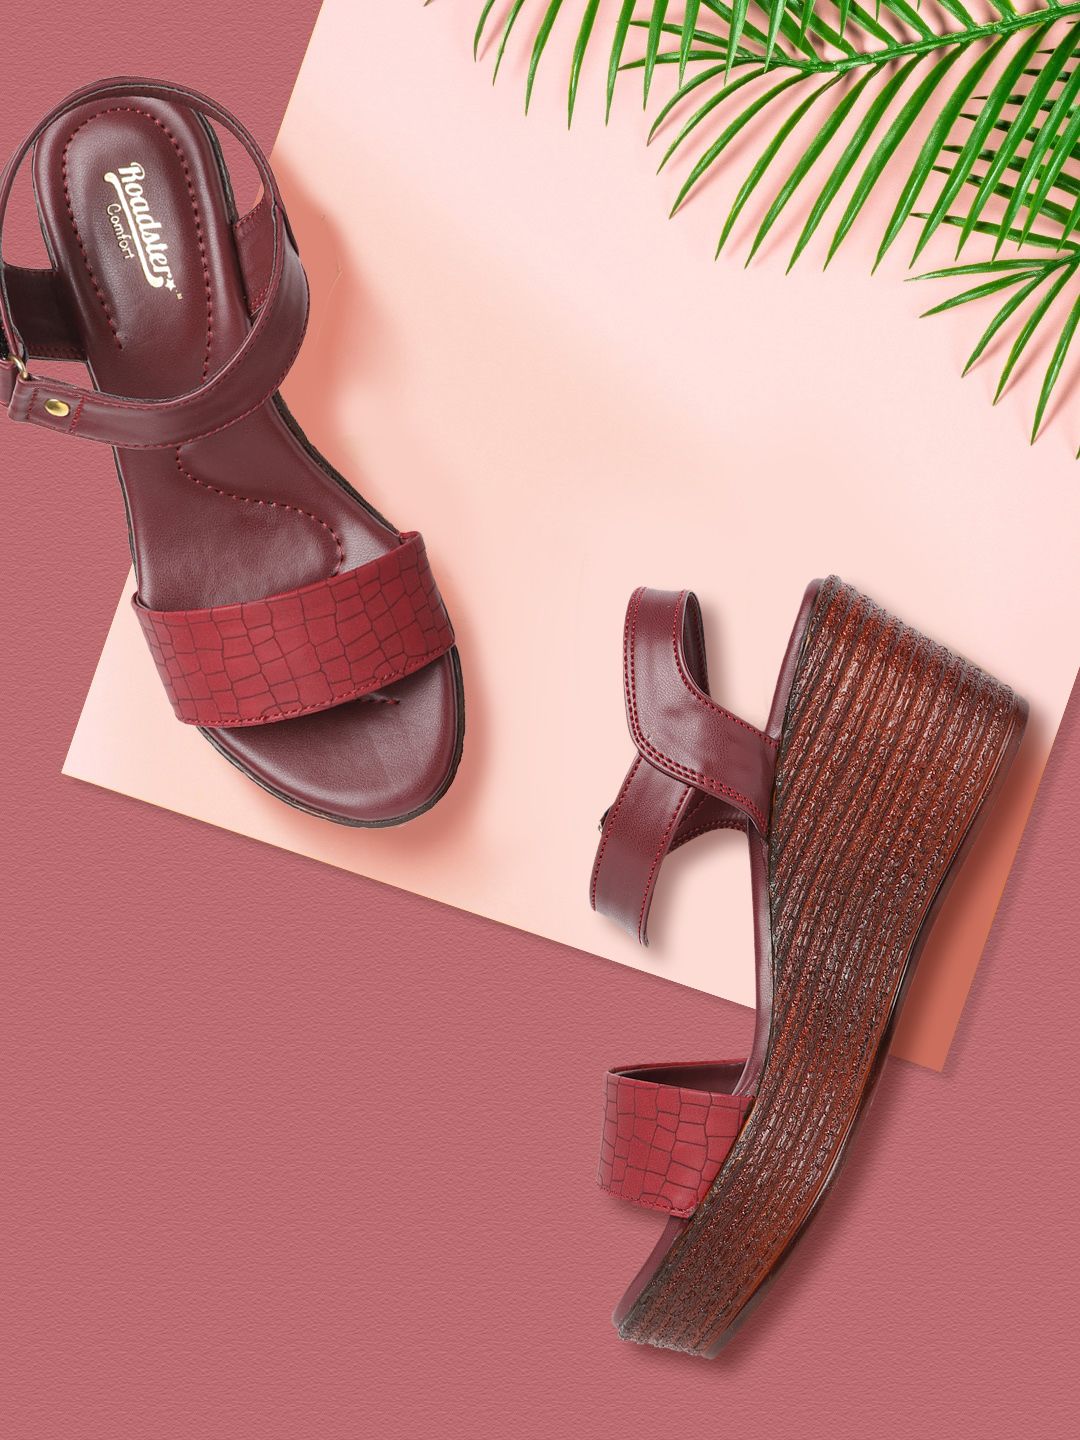 The Roadster Lifestyle Co Burgundy Croc Textured Wedges Price in India